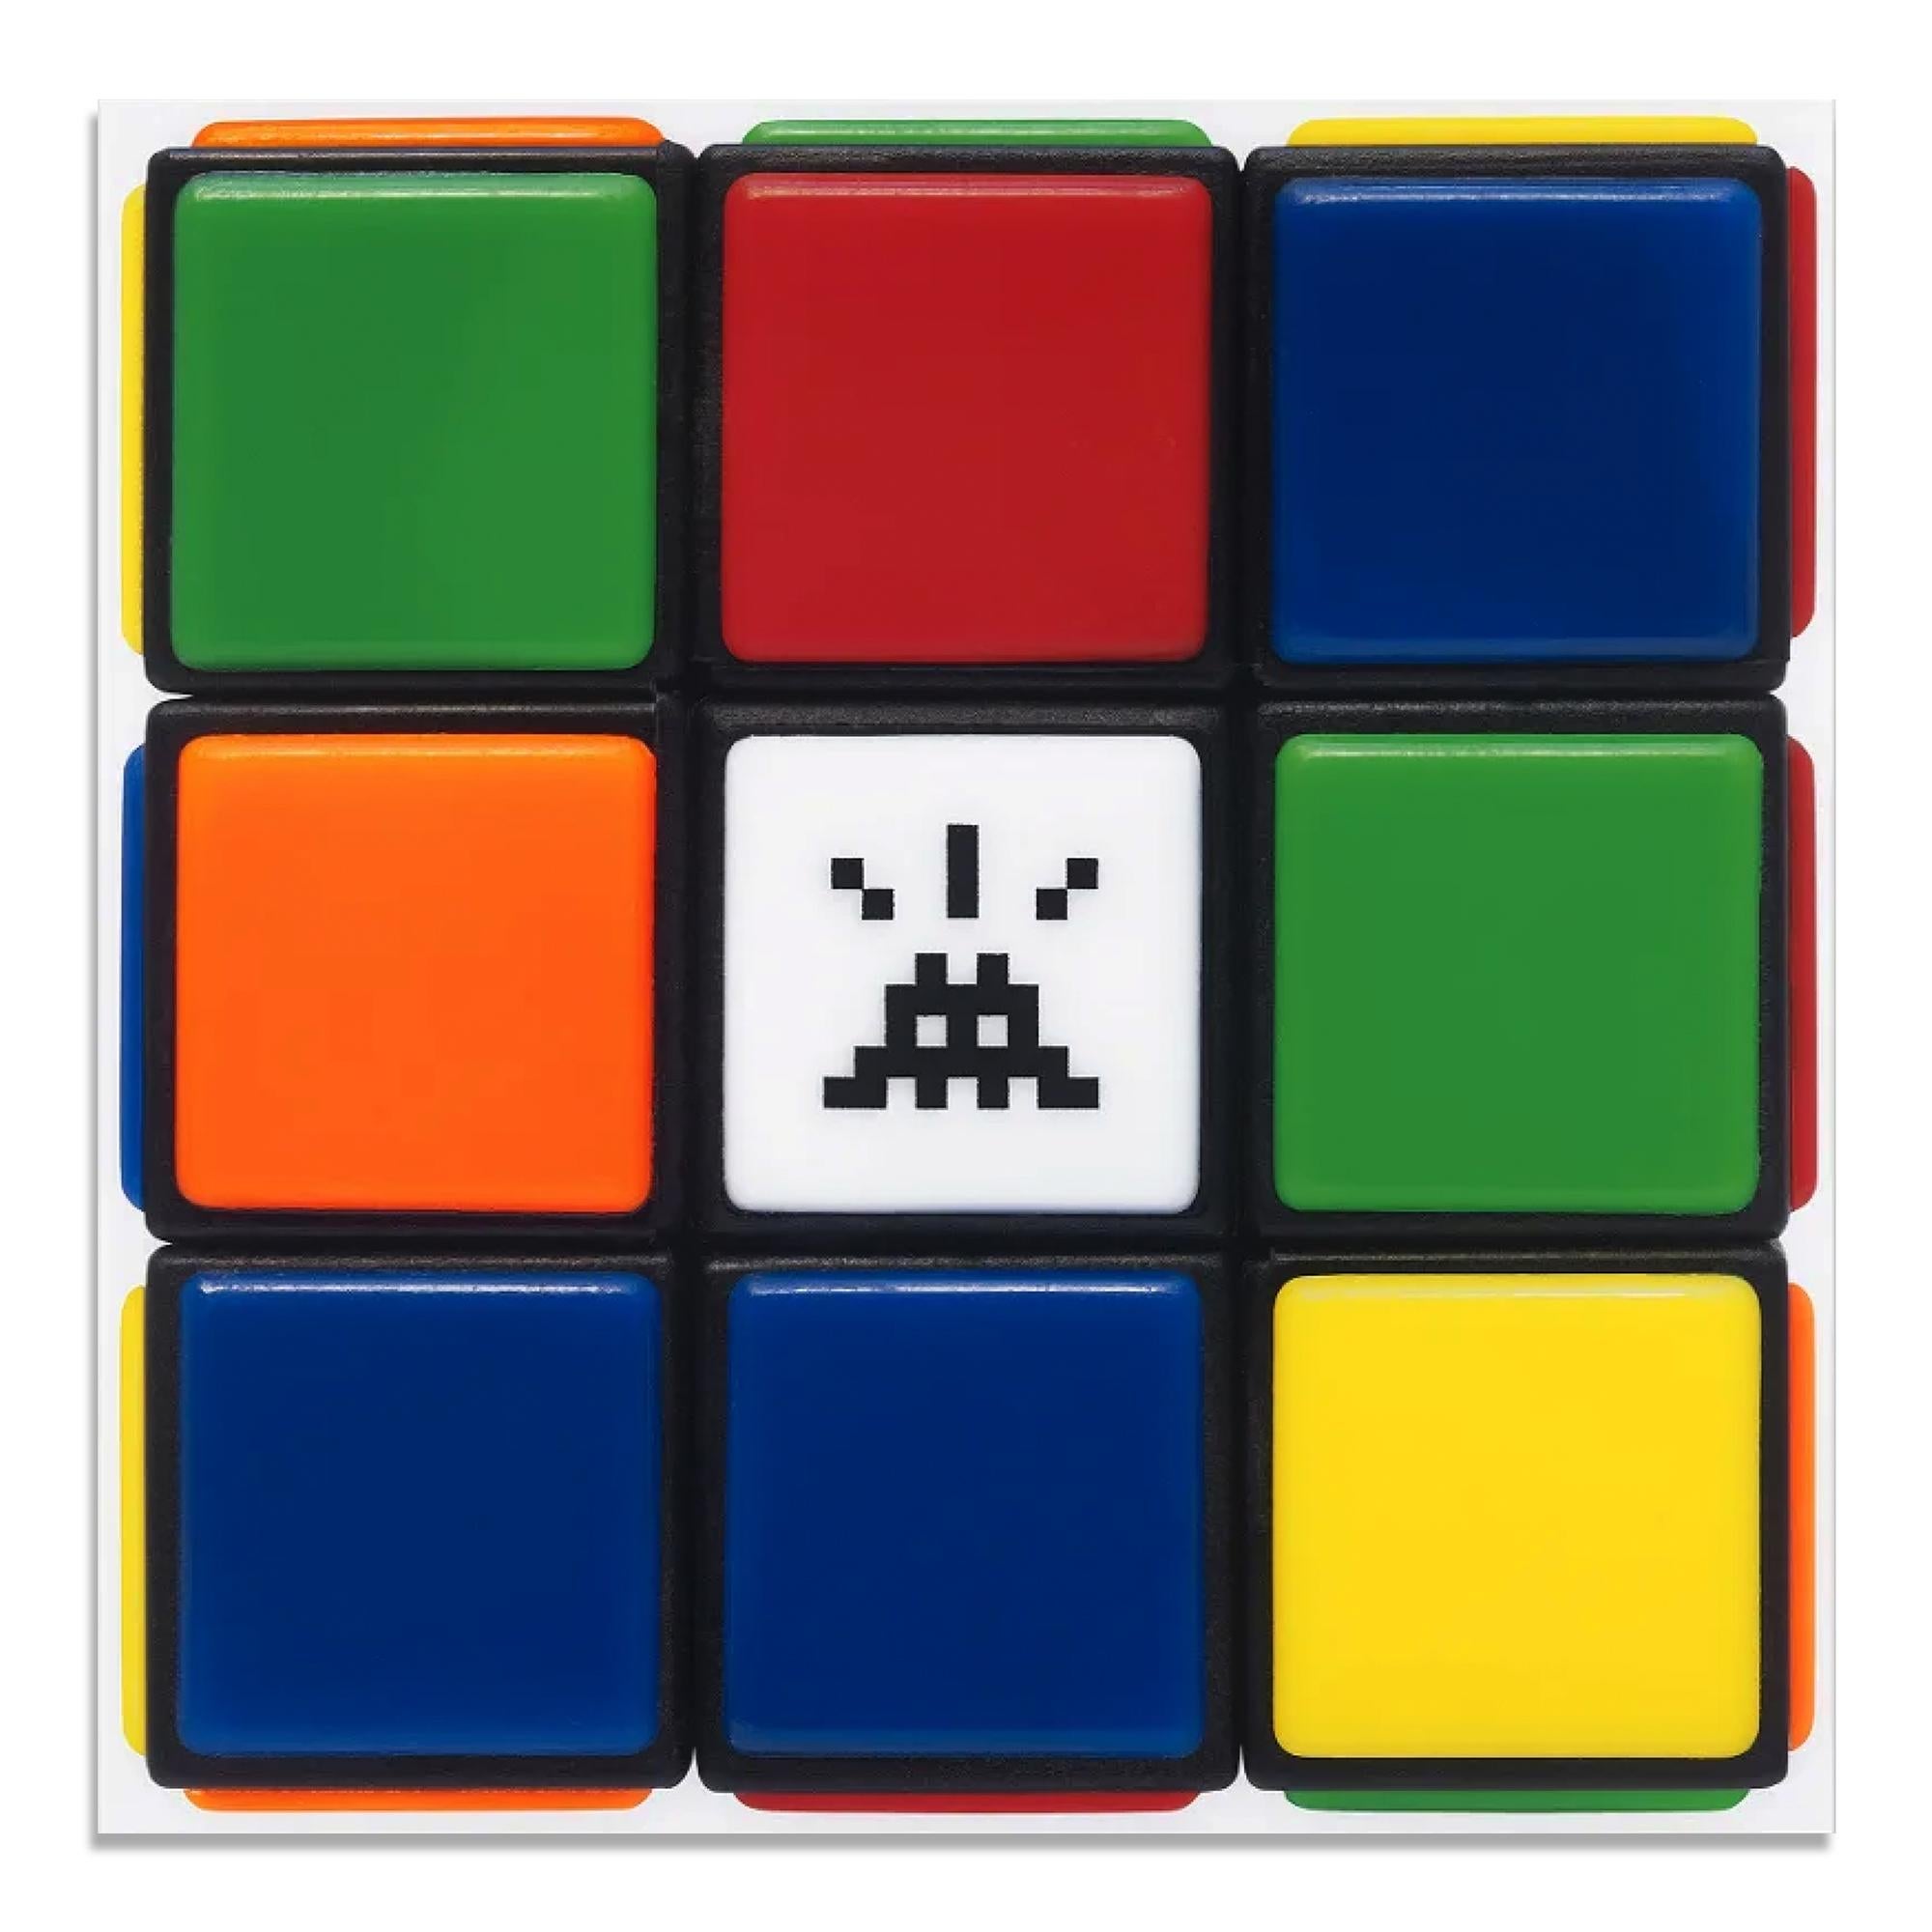 Invader, Invaded Cube (NVDR1-1), Signed Print, Contemporary Street Art